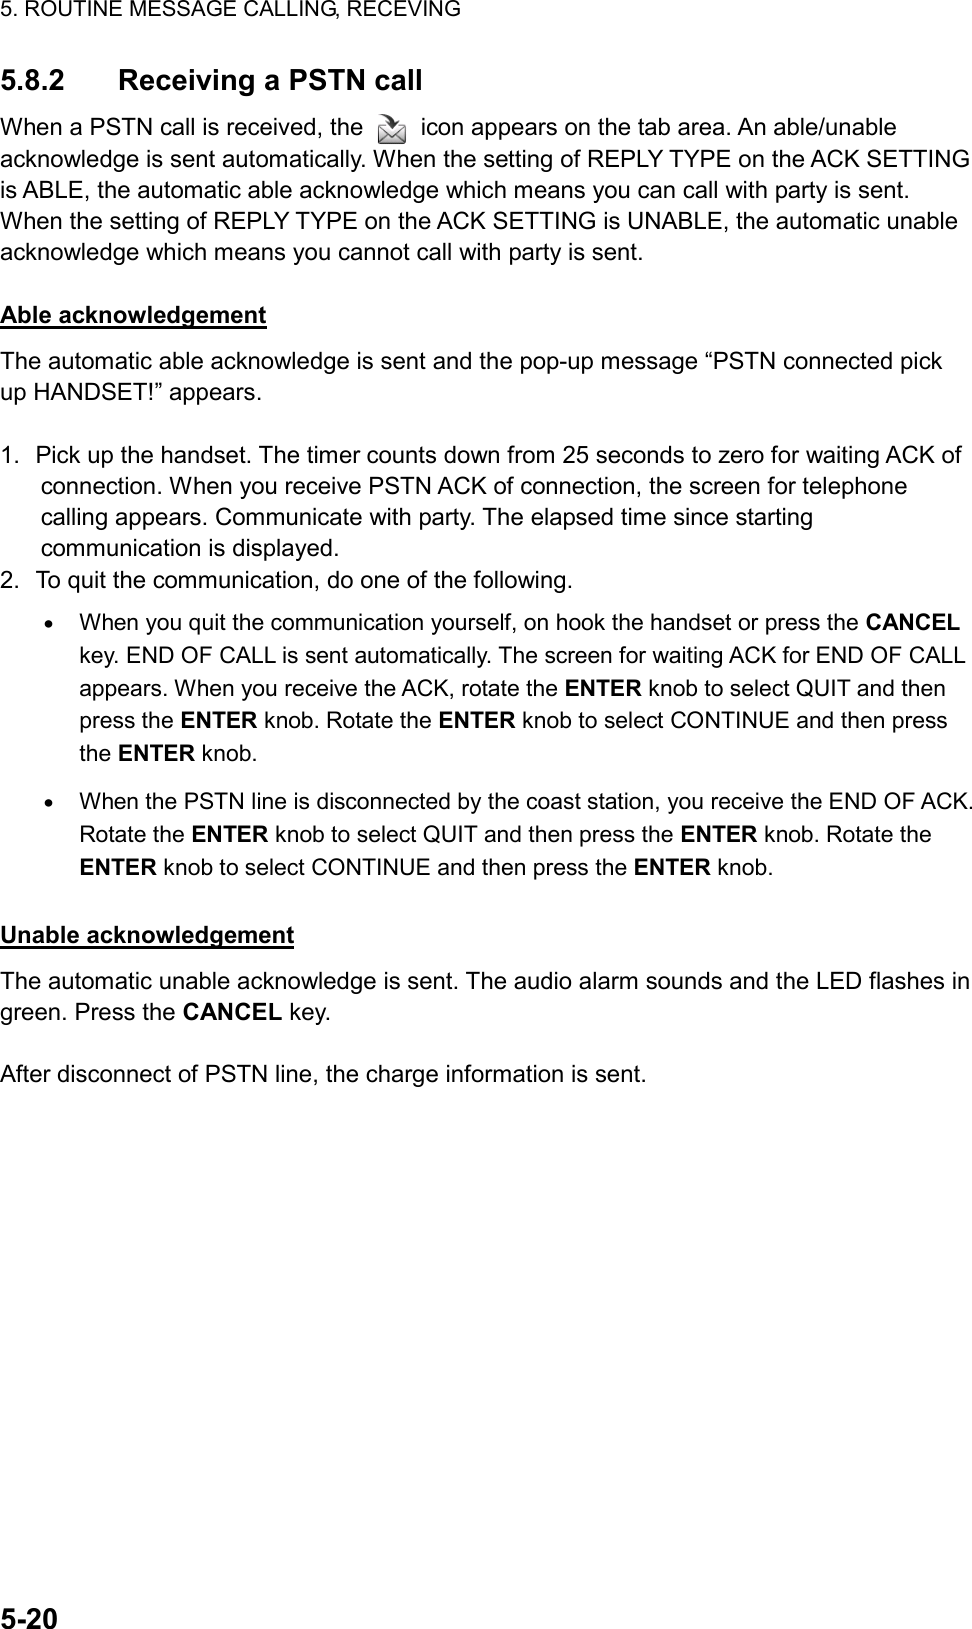 5. ROUTINE MESSAGE CALLING, RECEVING  5-20  5.8.2  Receiving a PSTN call When a PSTN call is received, the    icon appears on the tab area. An able/unable acknowledge is sent automatically. When the setting of REPLY TYPE on the ACK SETTING is ABLE, the automatic able acknowledge which means you can call with party is sent. When the setting of REPLY TYPE on the ACK SETTING is UNABLE, the automatic unable acknowledge which means you cannot call with party is sent.  Able acknowledgement The automatic able acknowledge is sent and the pop-up message “PSTN connected pick up HANDSET!” appears.  1.  Pick up the handset. The timer counts down from 25 seconds to zero for waiting ACK of connection. When you receive PSTN ACK of connection, the screen for telephone calling appears. Communicate with party. The elapsed time since starting communication is displayed. 2.  To quit the communication, do one of the following. •  When you quit the communication yourself, on hook the handset or press the CANCEL key. END OF CALL is sent automatically. The screen for waiting ACK for END OF CALL appears. When you receive the ACK, rotate the ENTER knob to select QUIT and then press the ENTER knob. Rotate the ENTER knob to select CONTINUE and then press the ENTER knob. •  When the PSTN line is disconnected by the coast station, you receive the END OF ACK. Rotate the ENTER knob to select QUIT and then press the ENTER knob. Rotate the ENTER knob to select CONTINUE and then press the ENTER knob.  Unable acknowledgement The automatic unable acknowledge is sent. The audio alarm sounds and the LED flashes in green. Press the CANCEL key.  After disconnect of PSTN line, the charge information is sent.   